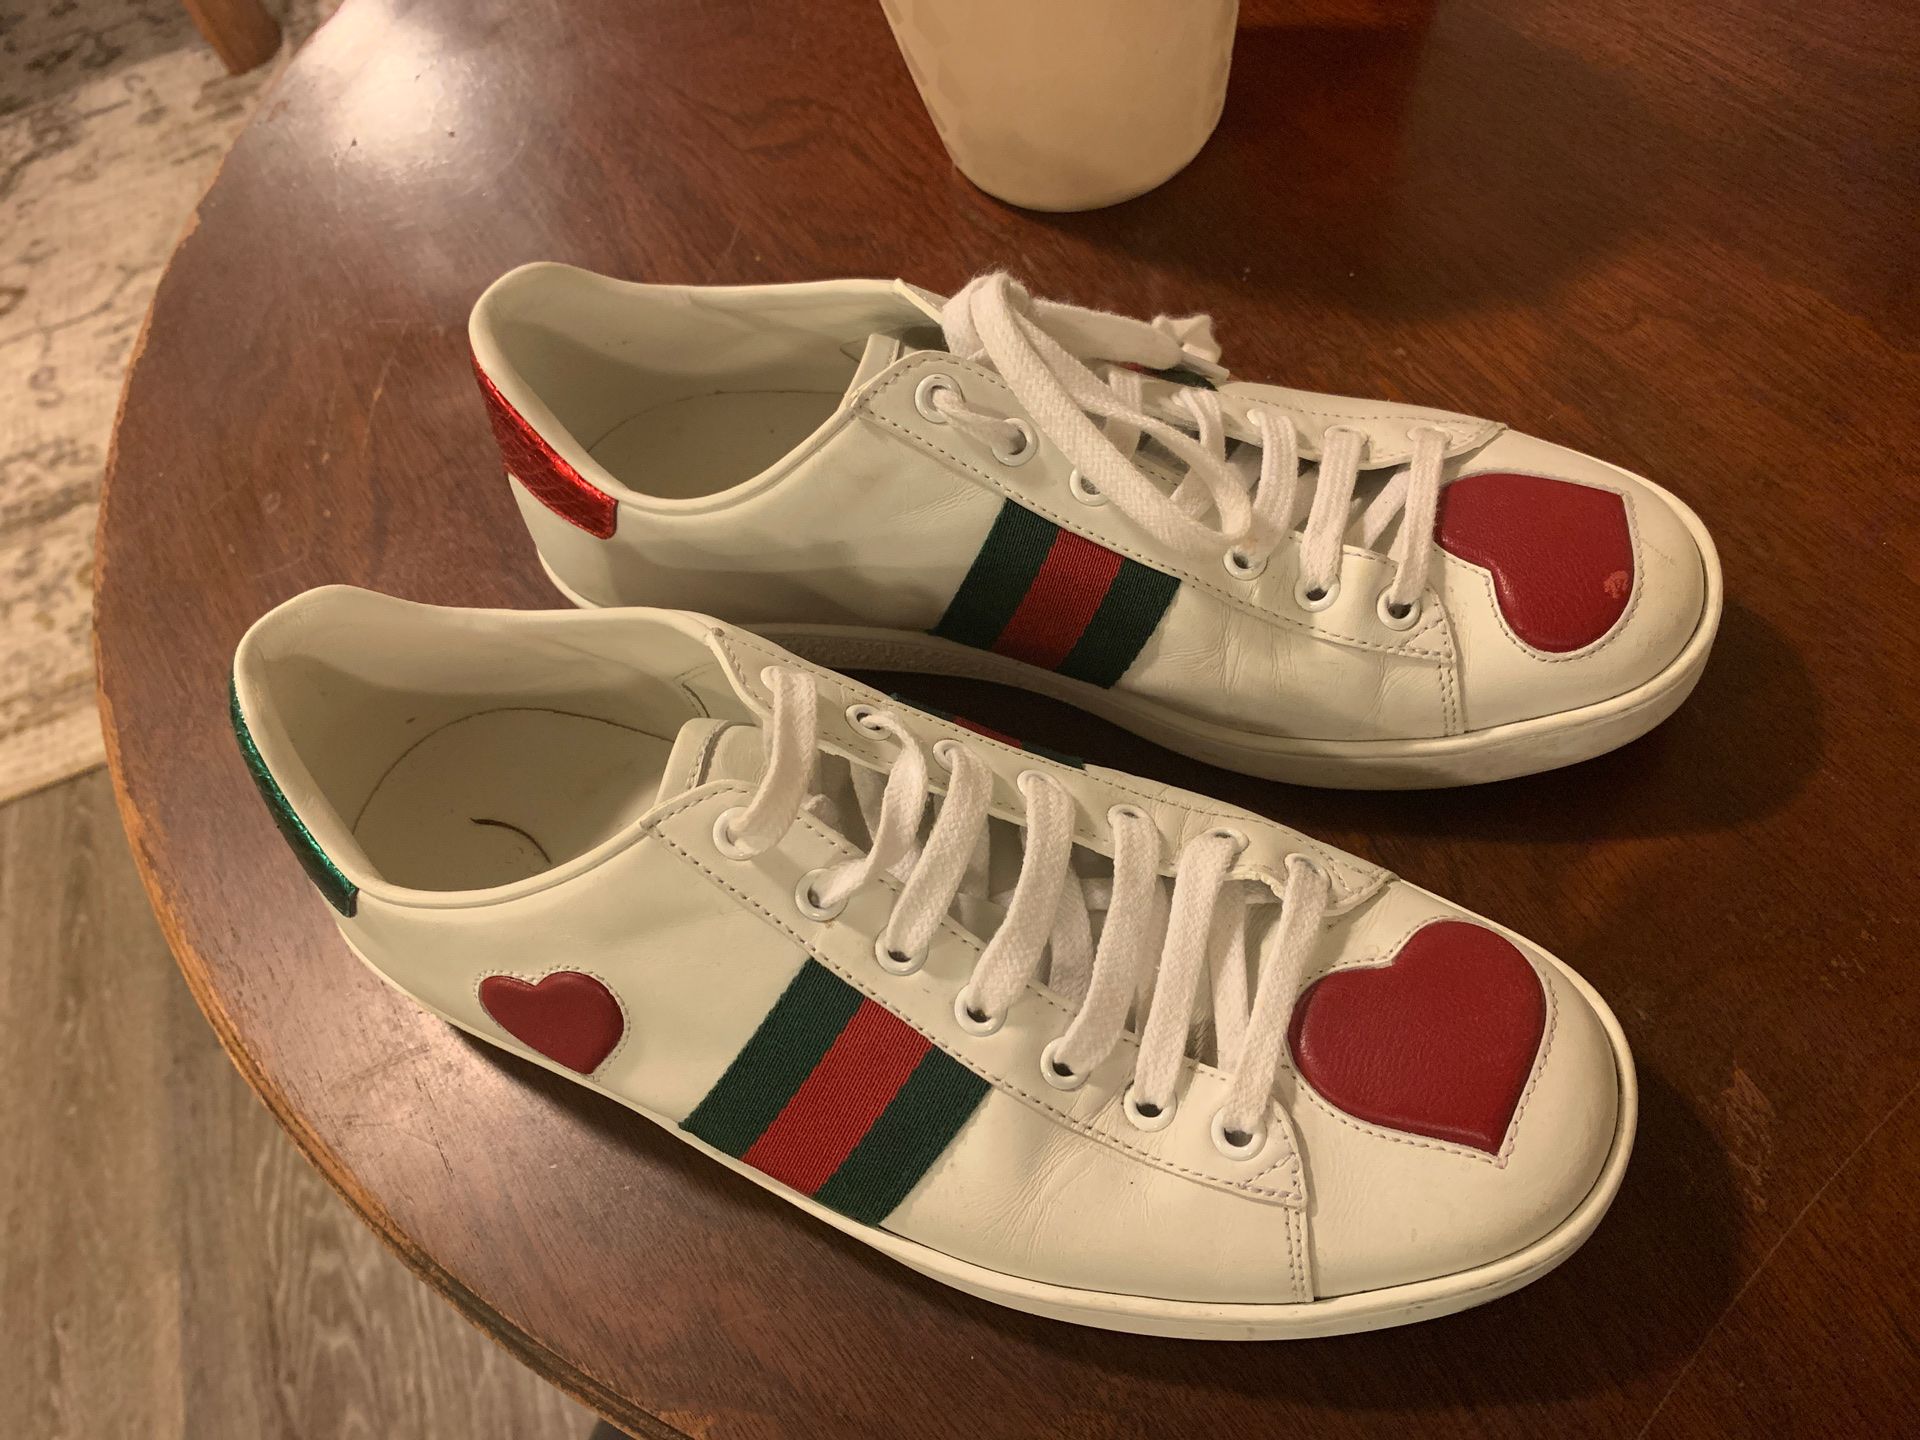 Authentic Gucci sneakers